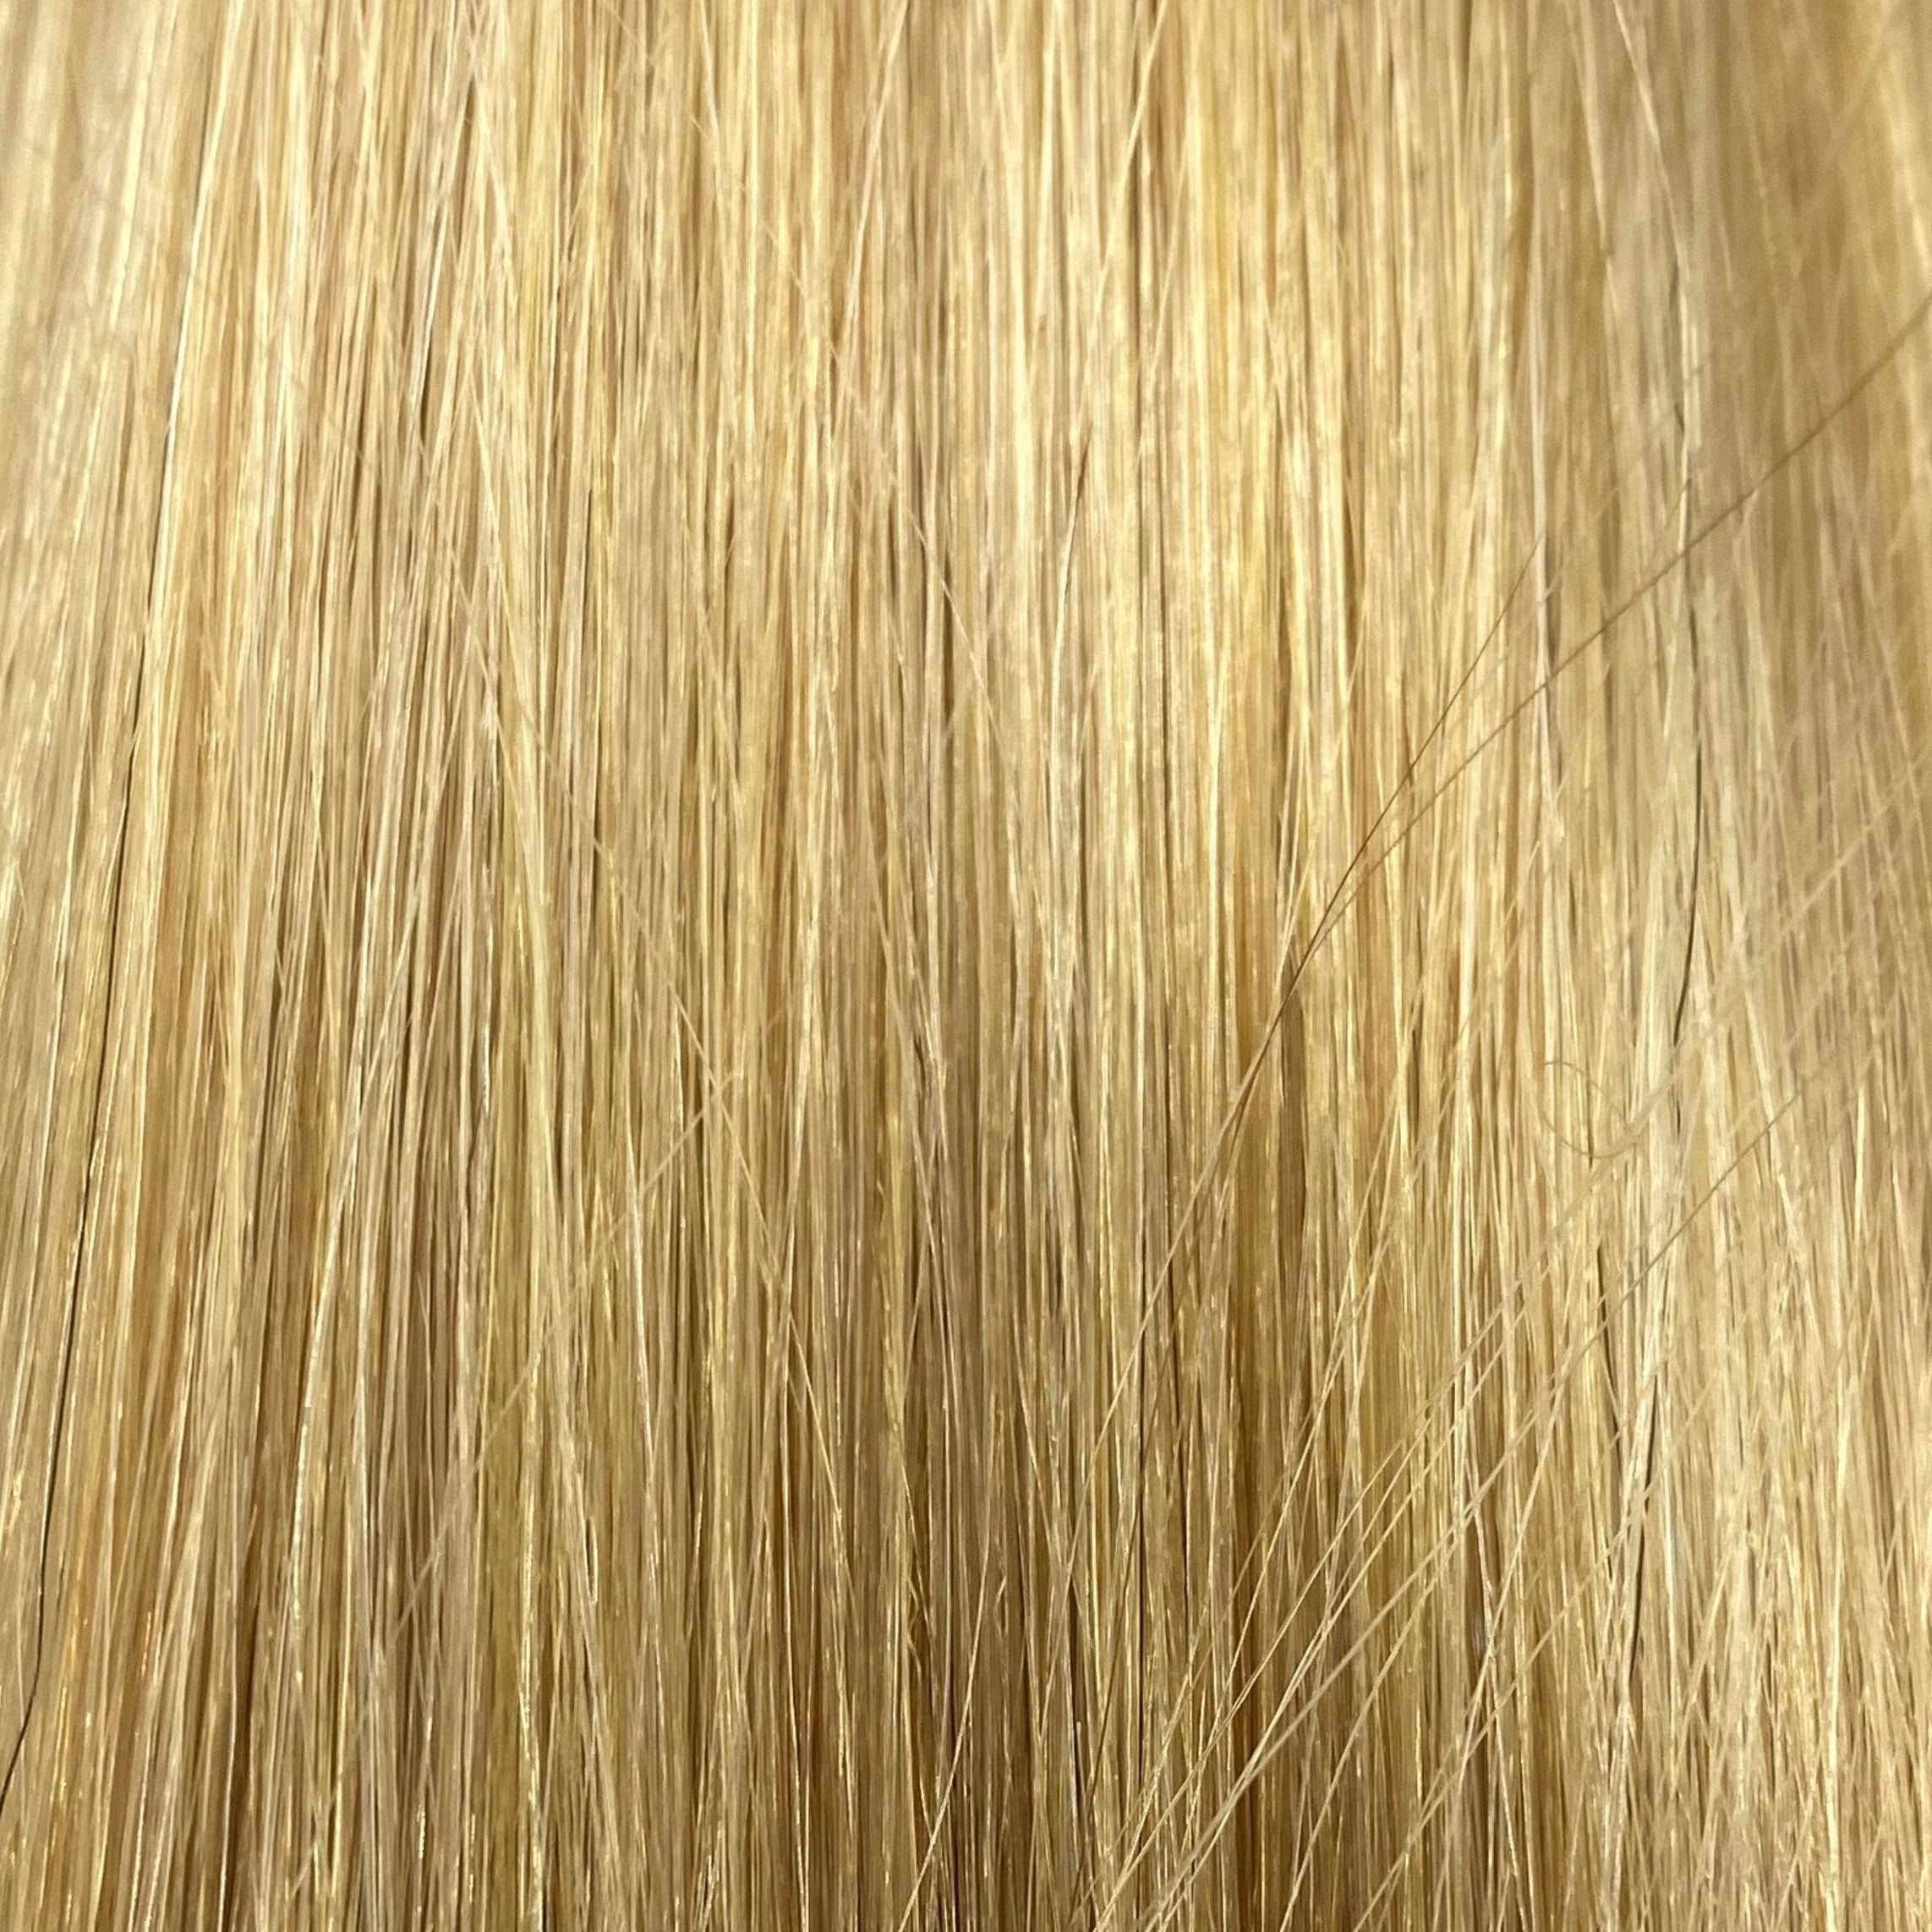 FUSION HIGHLIGHT #140 GOLDEN ULTRA BLONDE 40CM/ 16 INCHES  - 17.5 GRAMS - Image 1